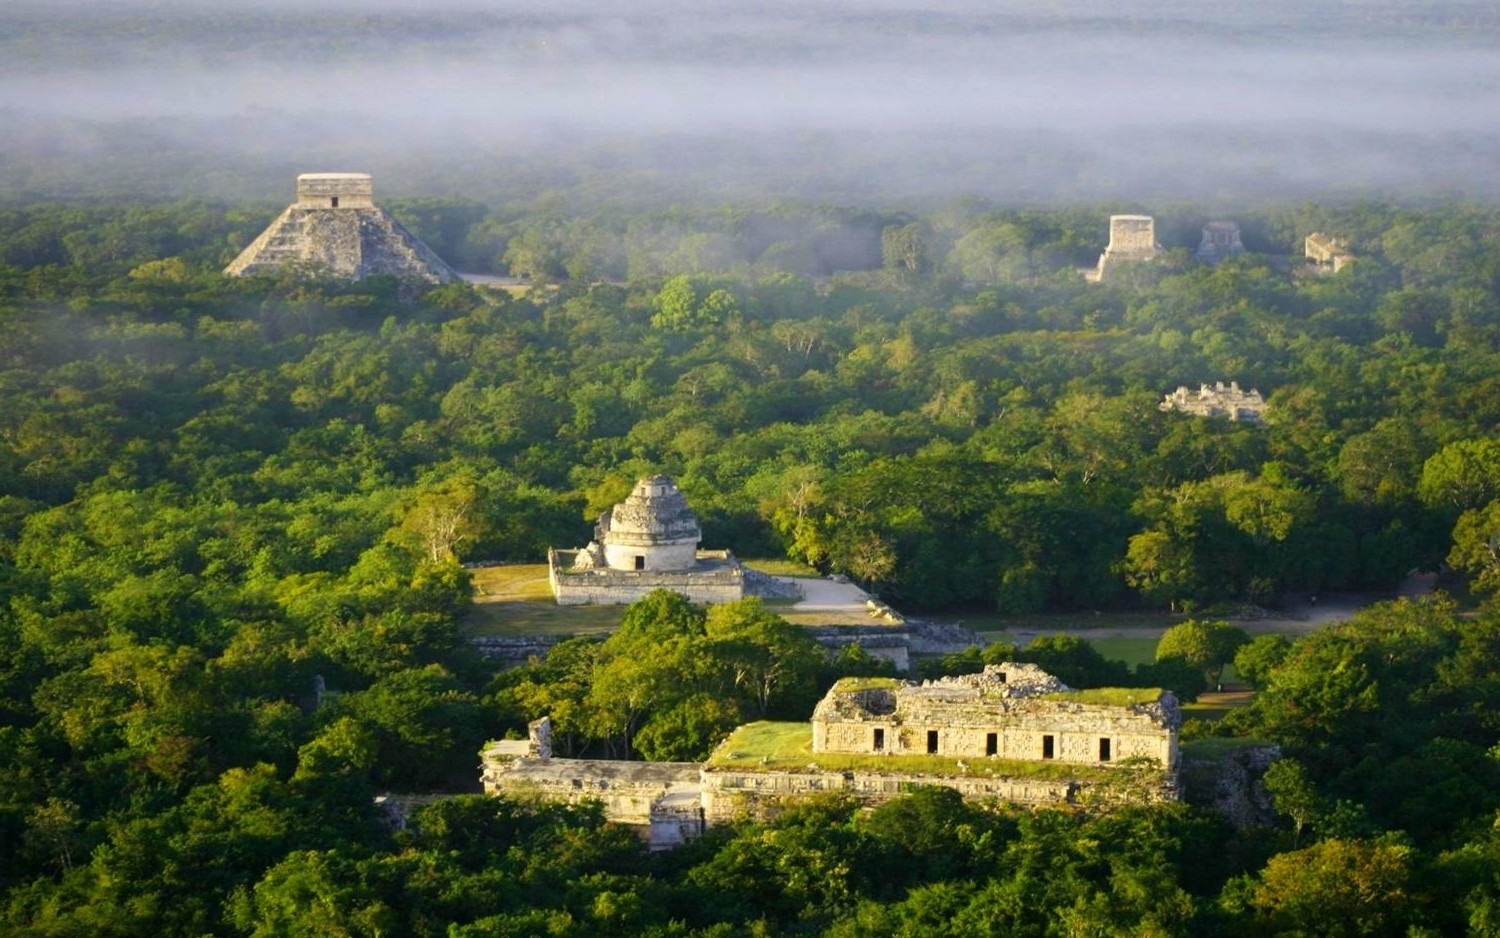 landscape, Nature, Chichen Itza, Temple, Ruins, Archeology, Tropical Forest, Mexico, Morning, Mist, Sunlight, Aerial View Wallpaper